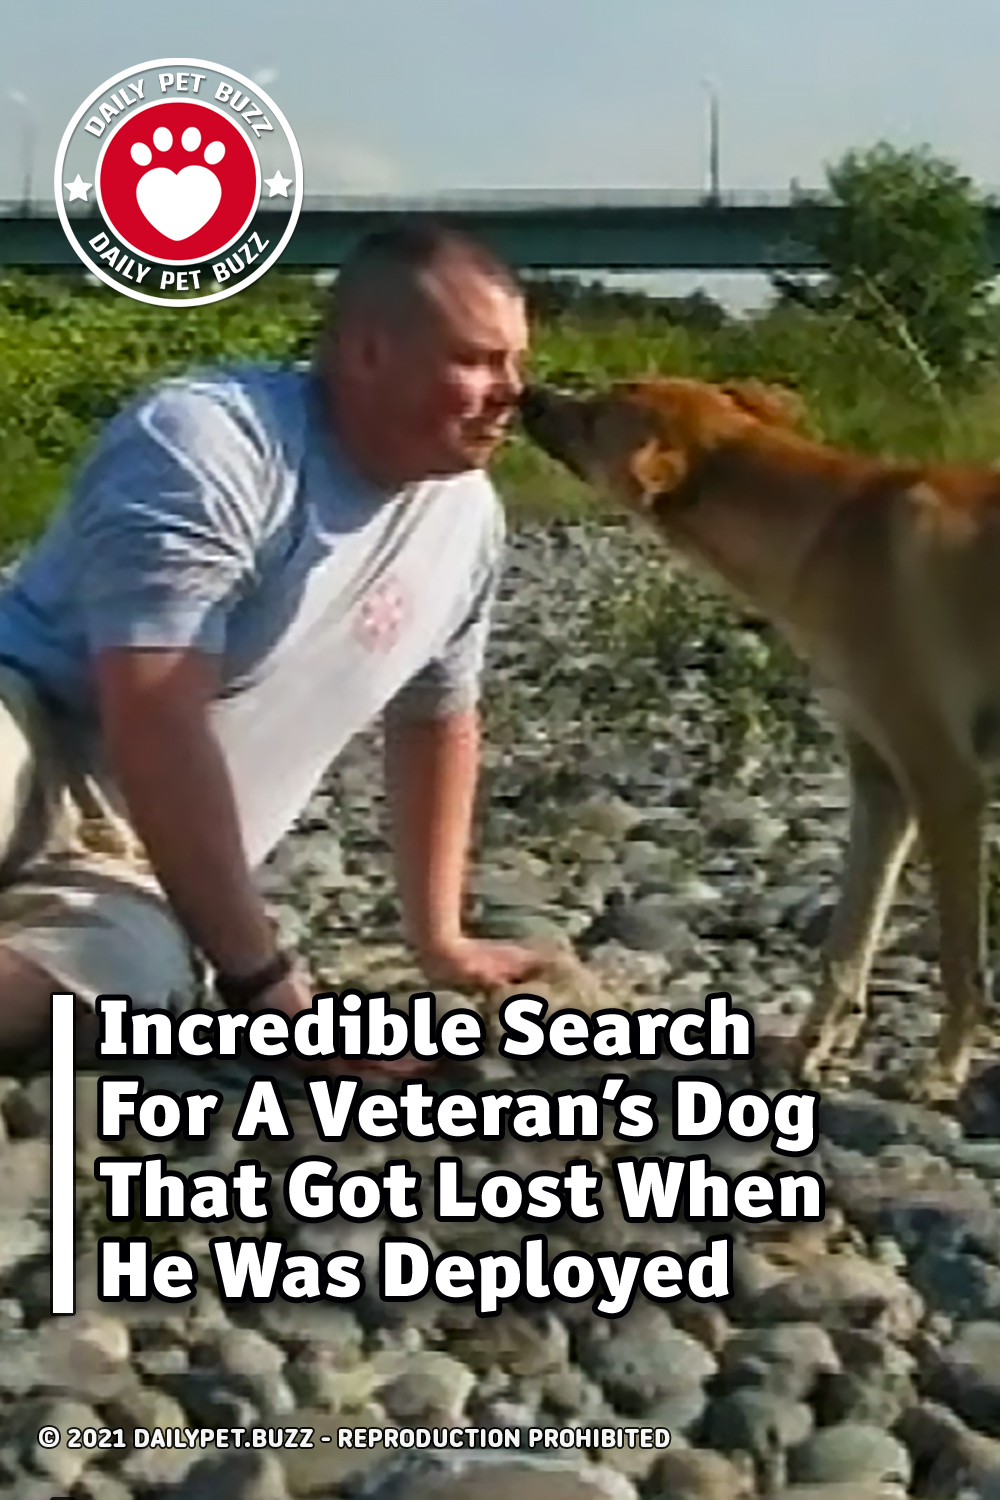 Incredible Search For A Veteran\'s Dog That Got Lost When He Was Deployed